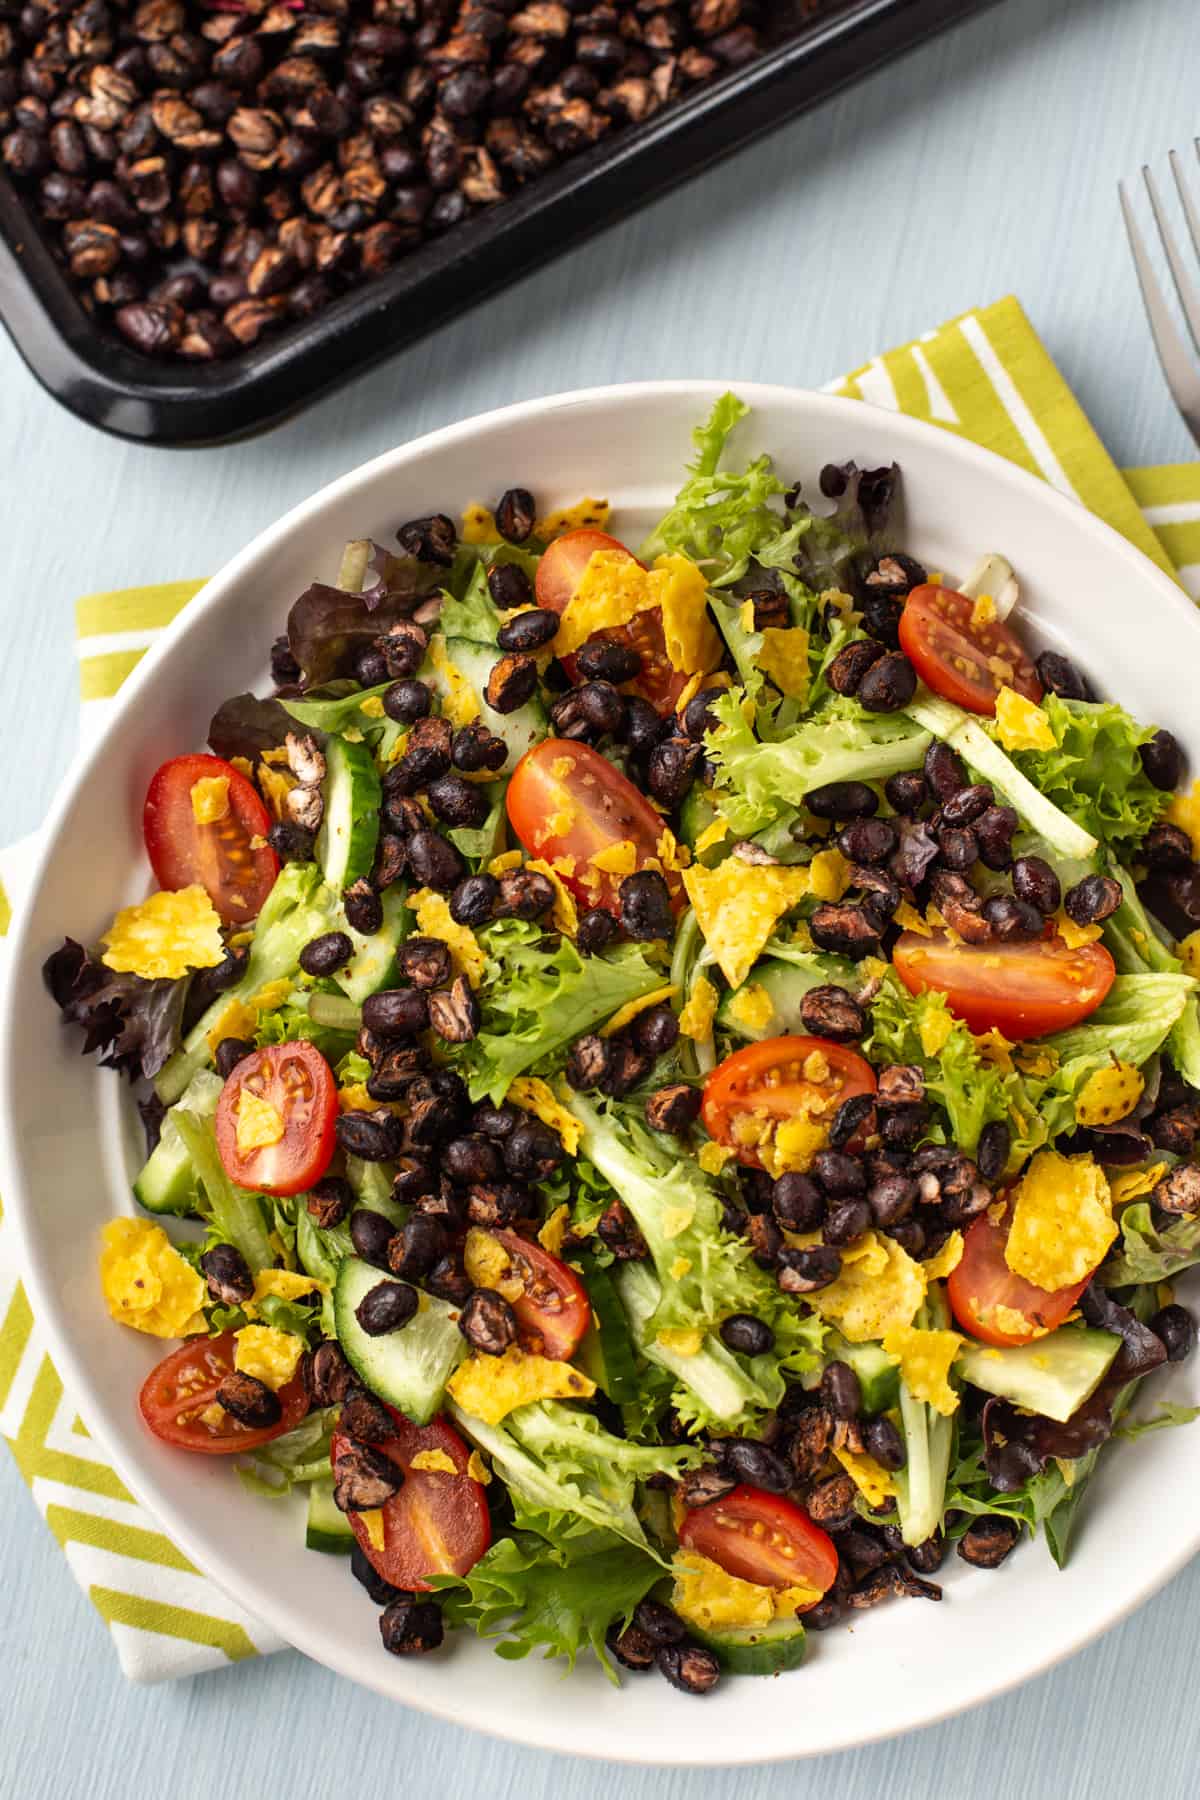 A simple salad with tomatoes and cucumber, topped with roasted black beans.